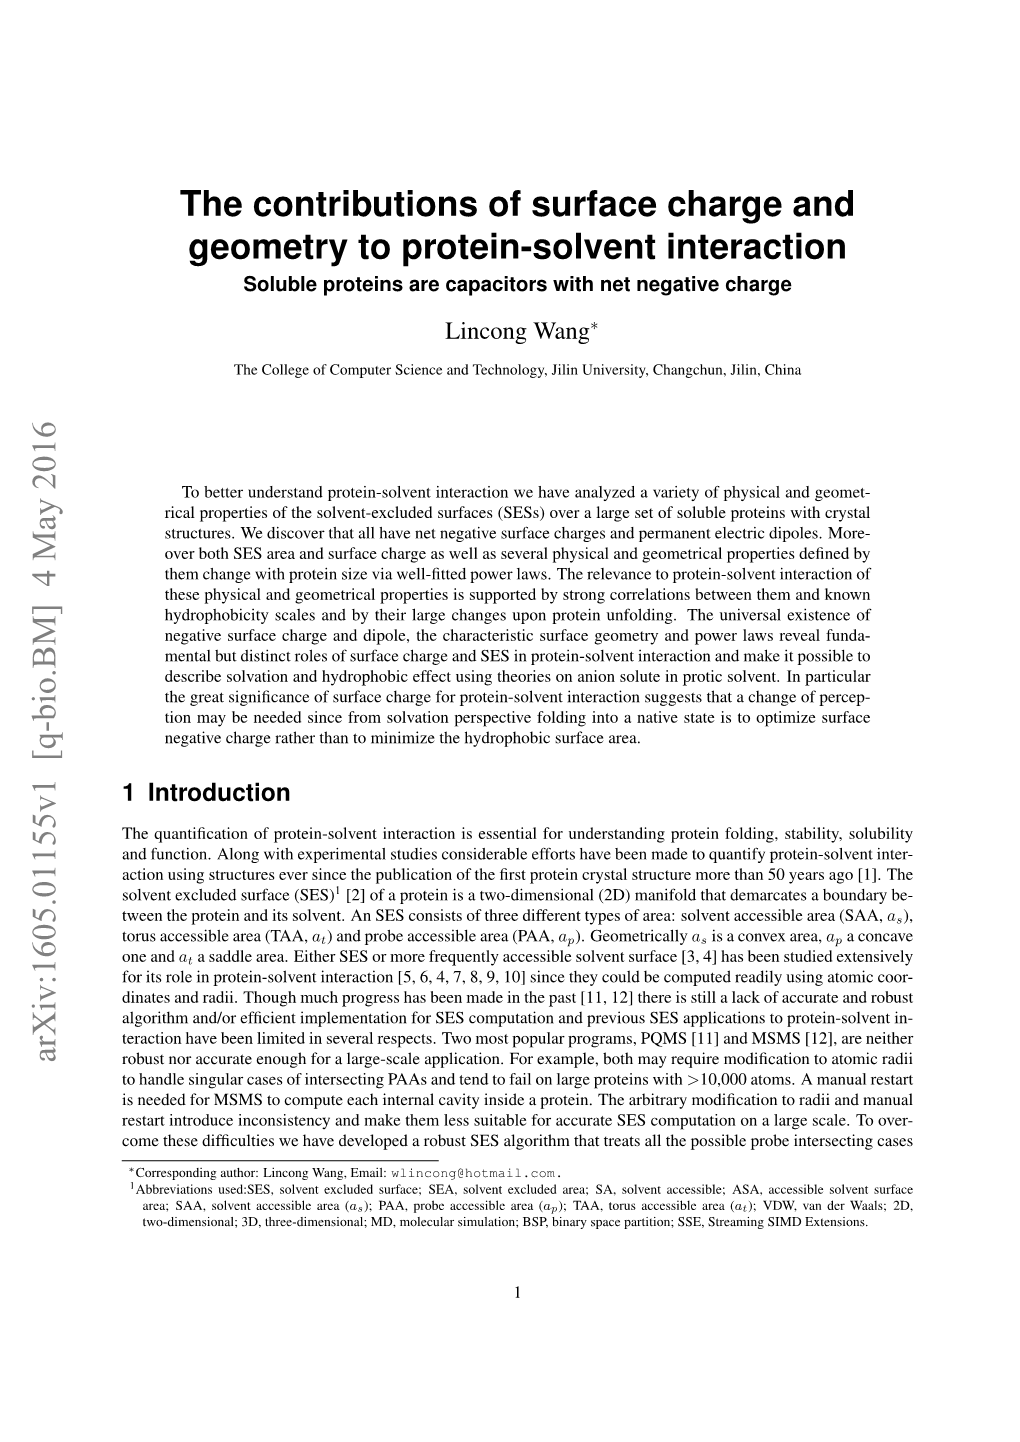 The Contributions of Surface Charge and Geometry to Protein-Solvent Interaction Arxiv:1605.01155V1 [Q-Bio.BM] 4 May 2016